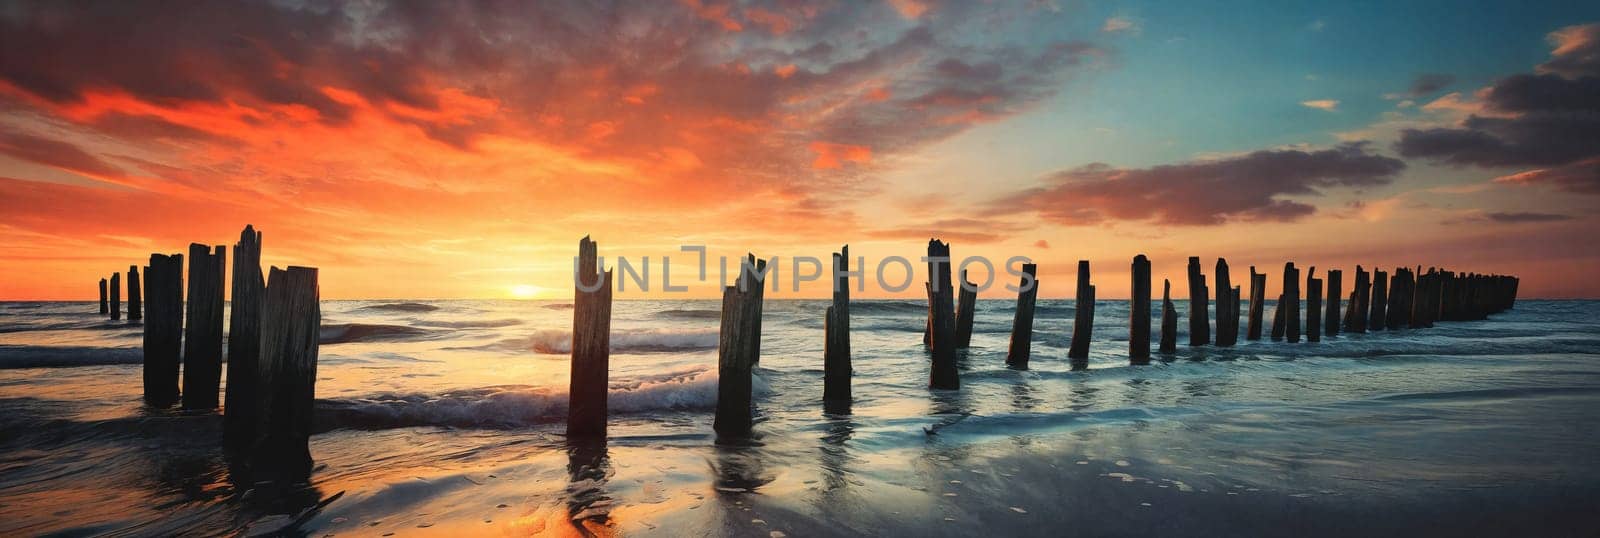 A tranquil scene of a broken wooden jetty stretching out into the golden sea by GoodOlga